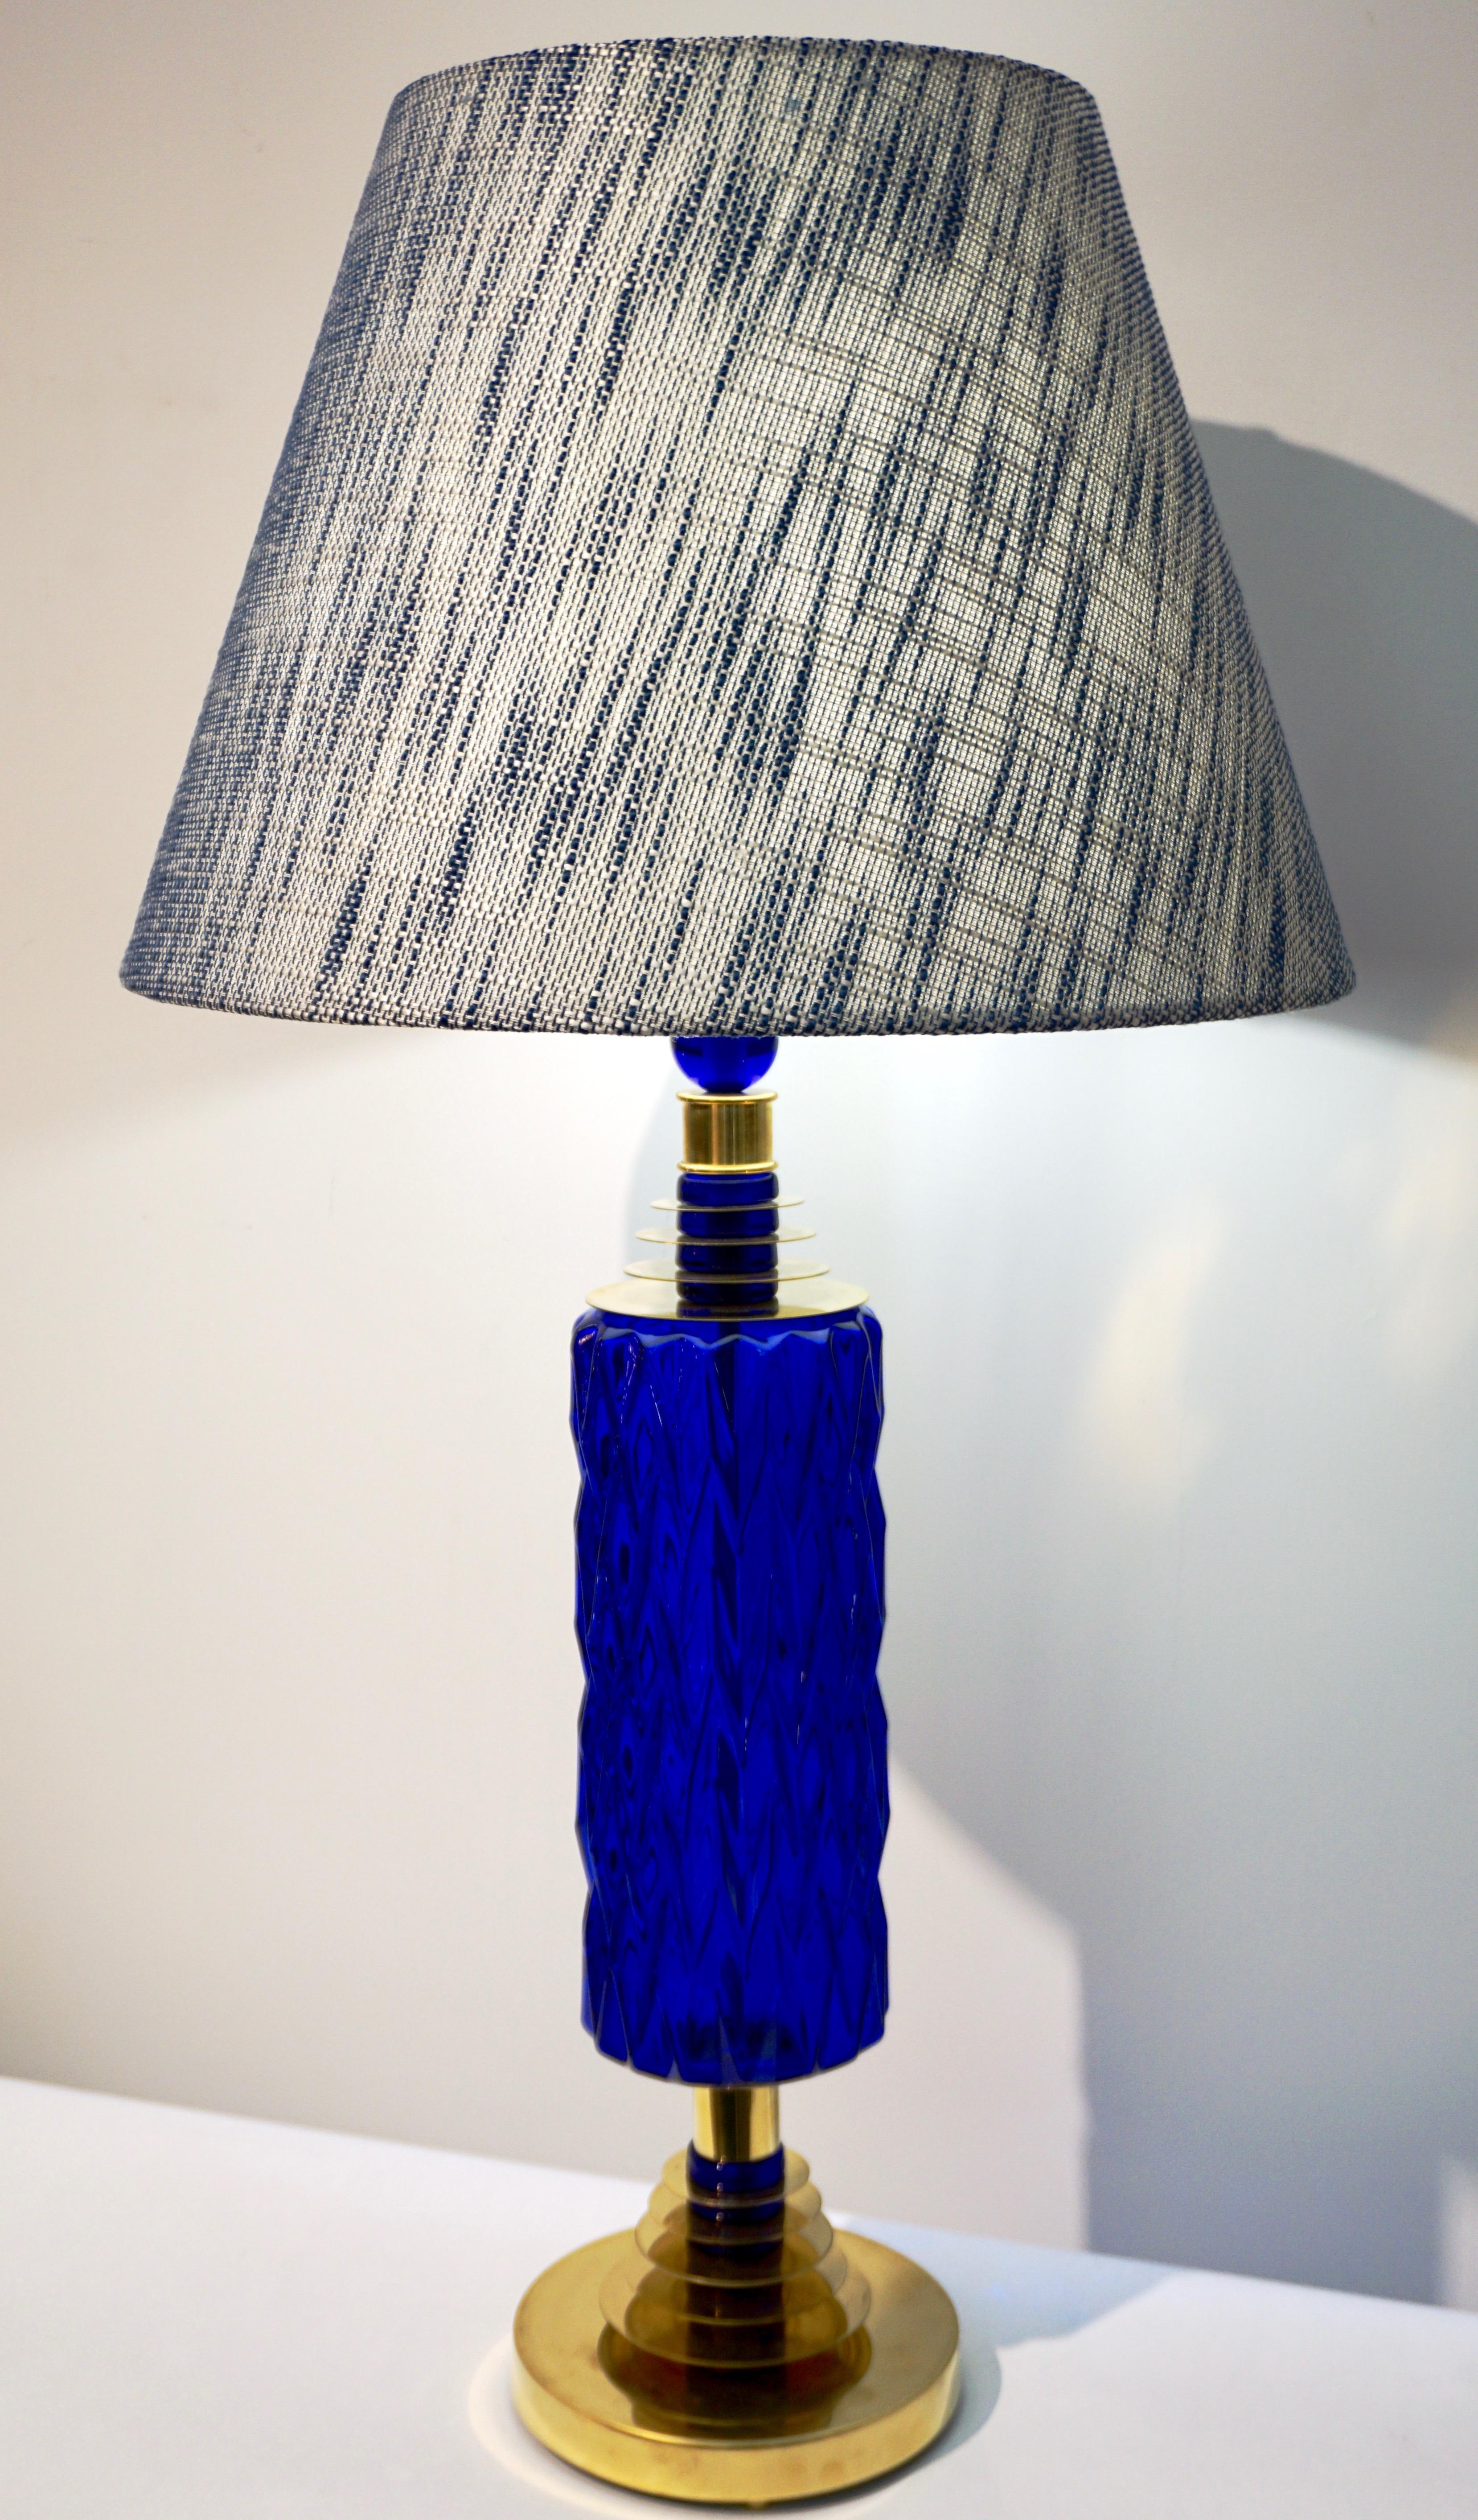 A tall modern pair of blown beehive Murano glass lamps, high quality of craftsmanship, organic design with blown royal blue bodies, preciously decorated with a diamond cut pattern and supported by hand made brass stepped accents interspersed with